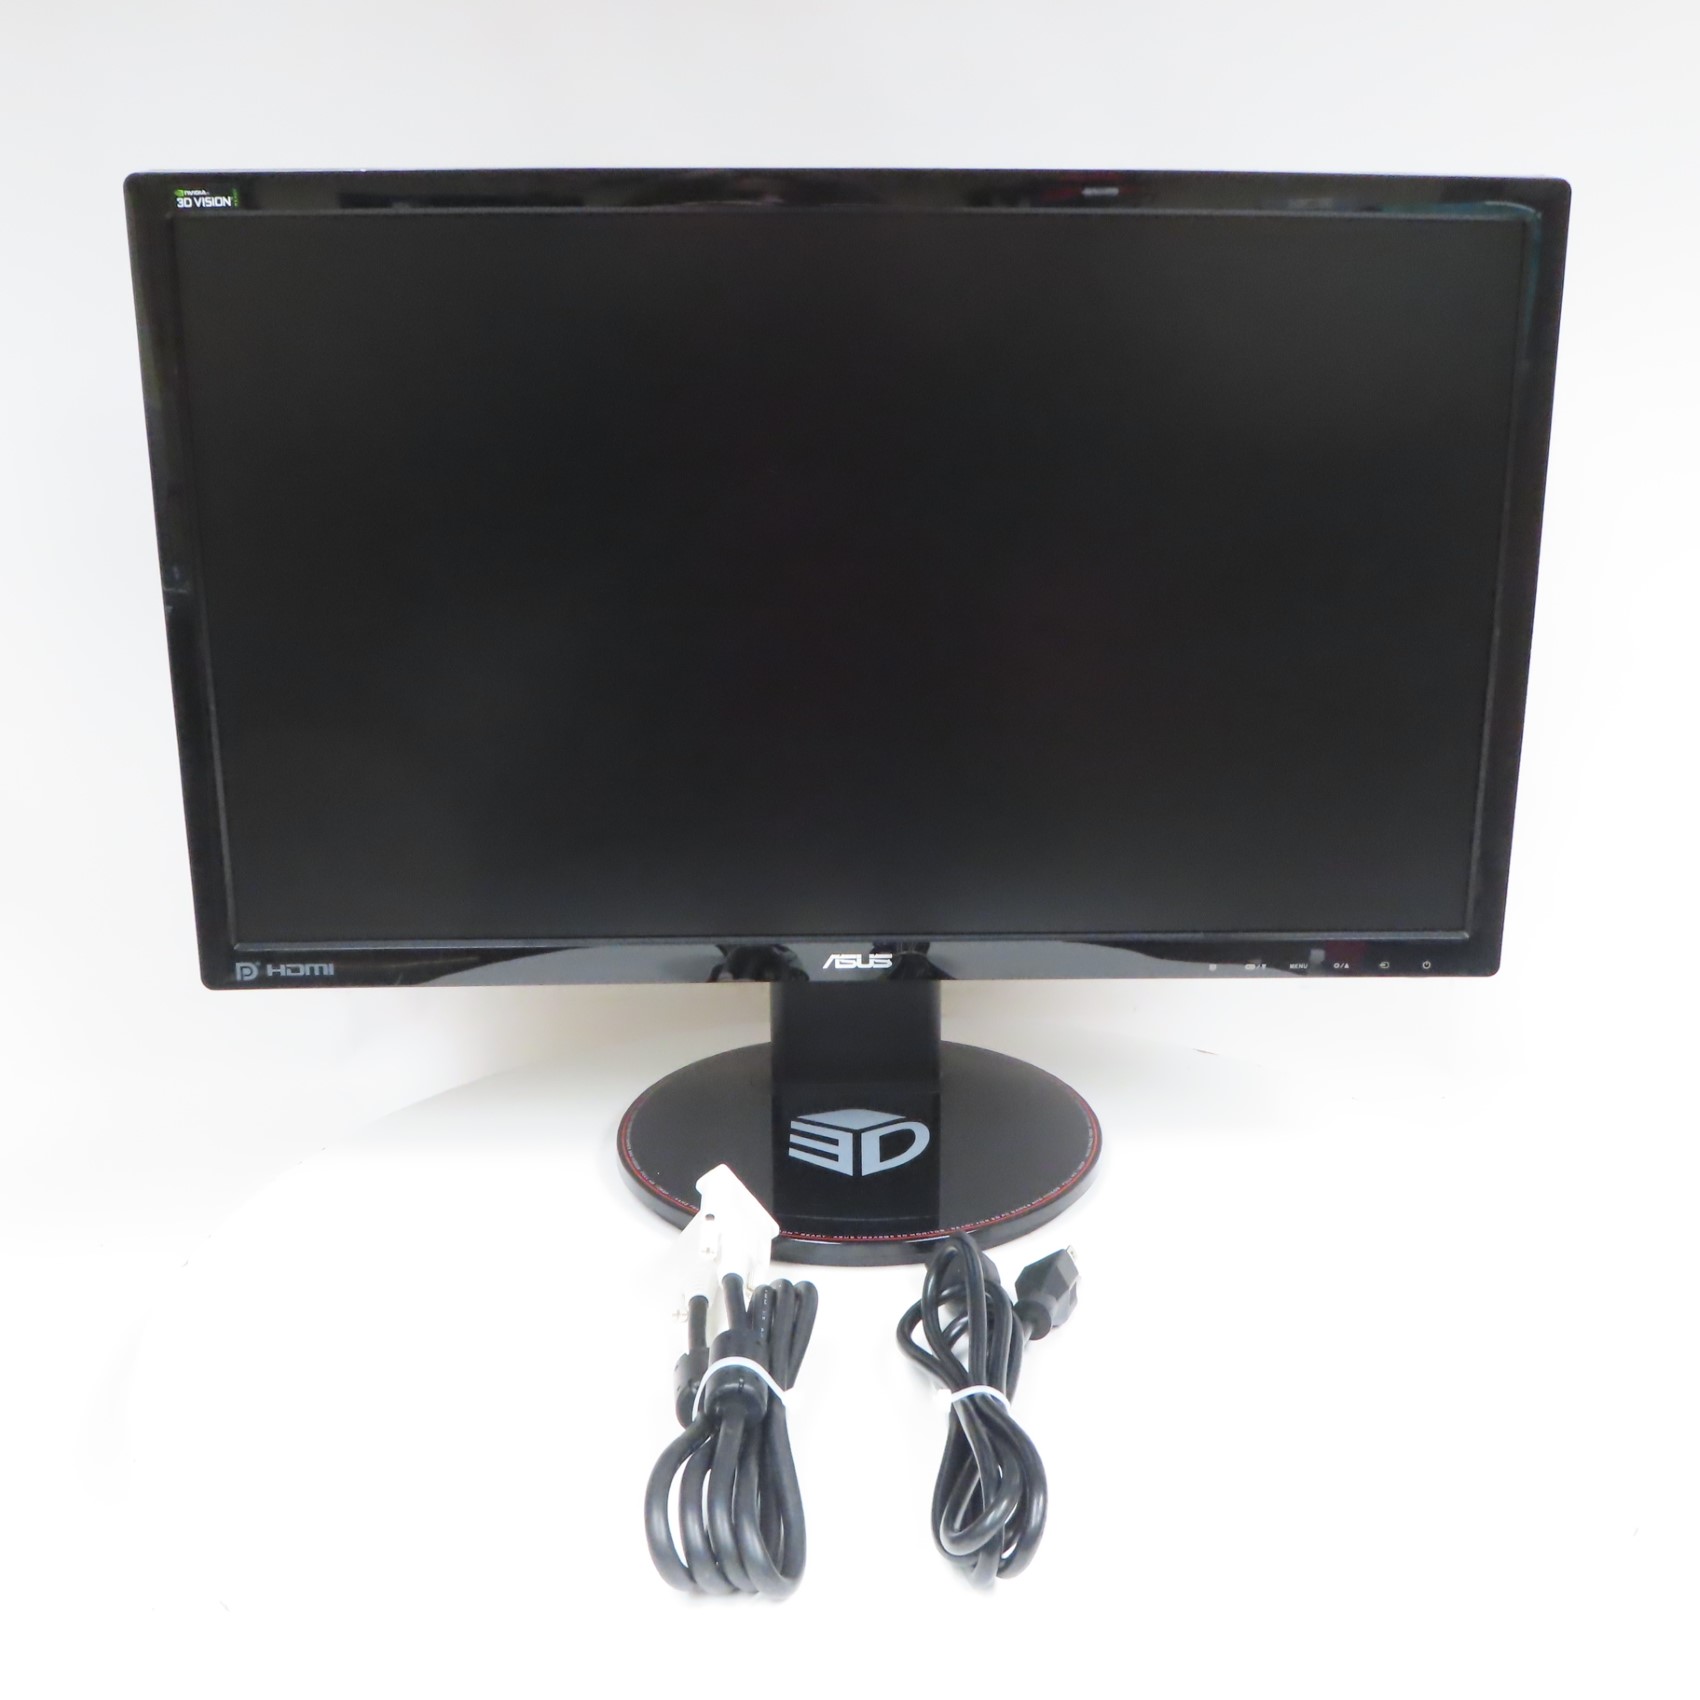 ONN 100027813 24 165 Hz FHD Gaming Monitor - Black for sale online